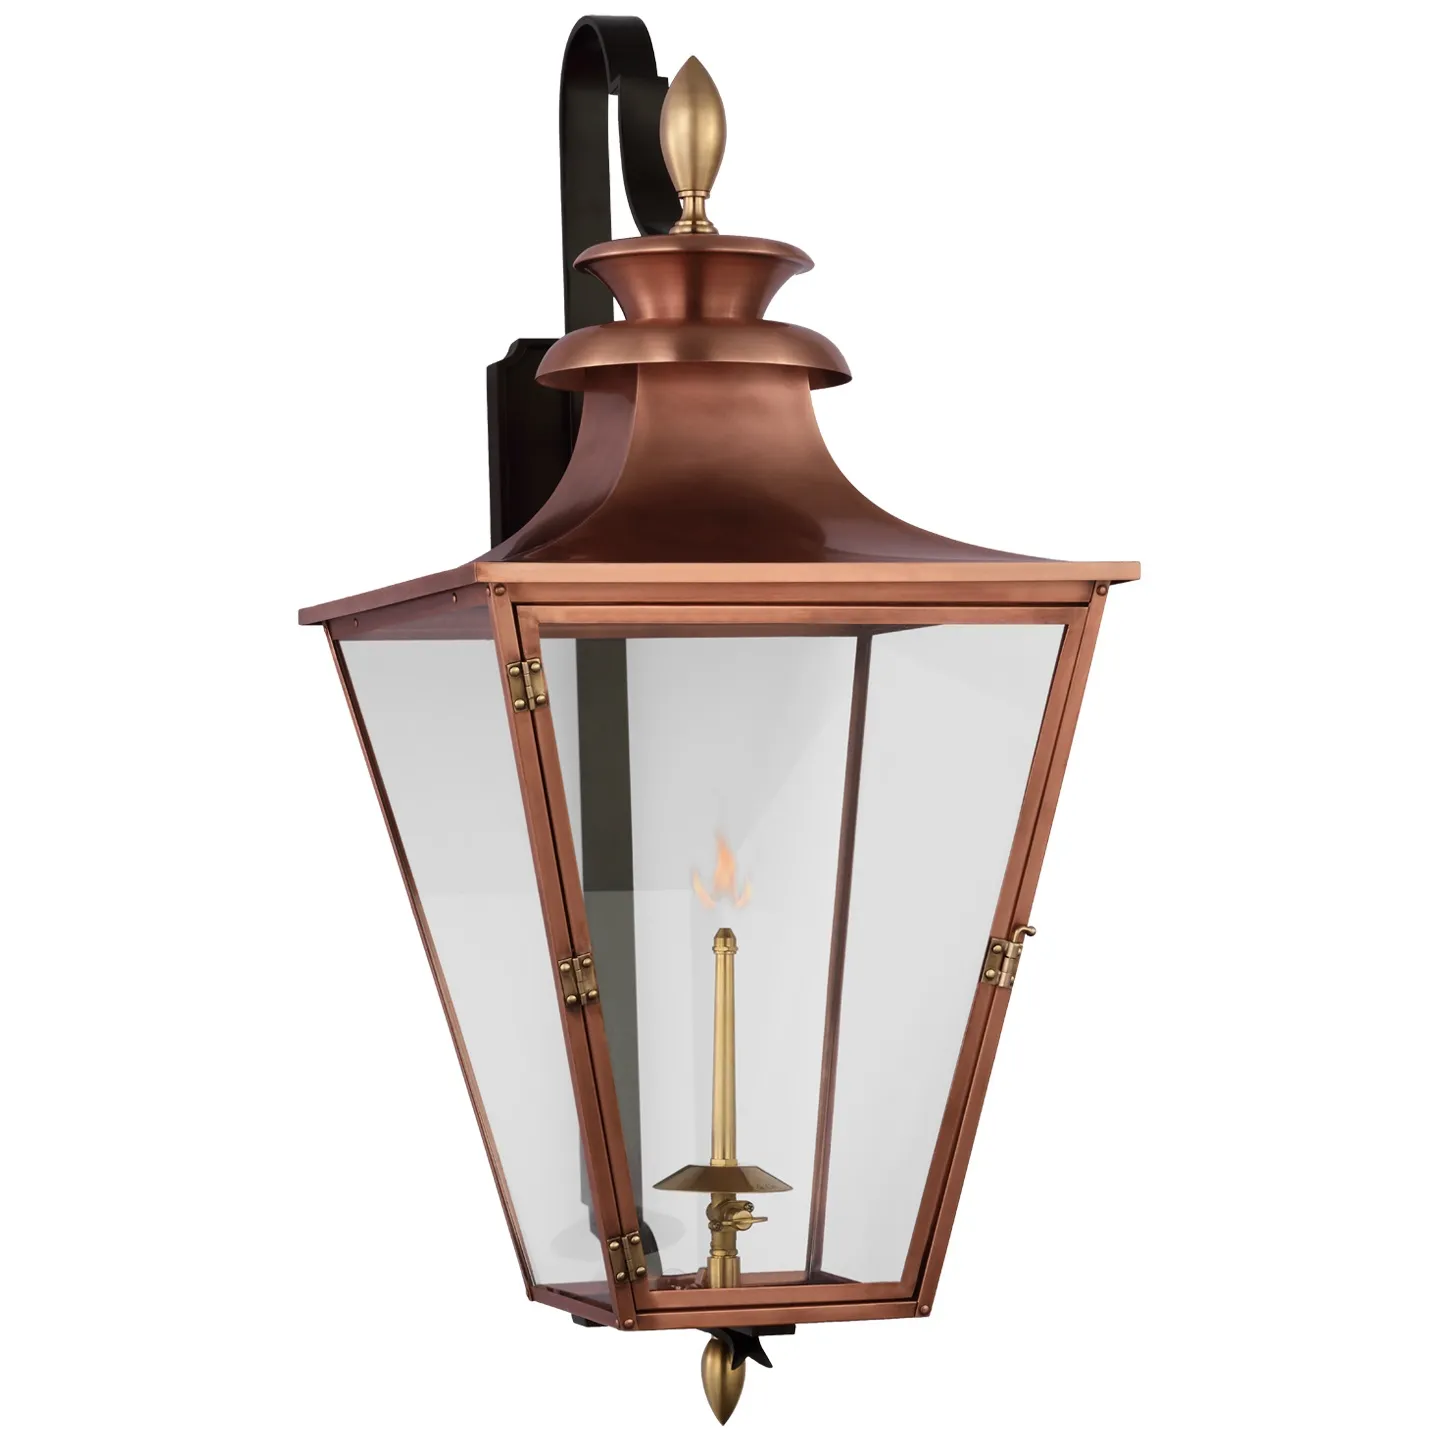 Albermarle Medium Bracketed Gas Wall Lantern in Soft Copper and Brass with Clear Glass